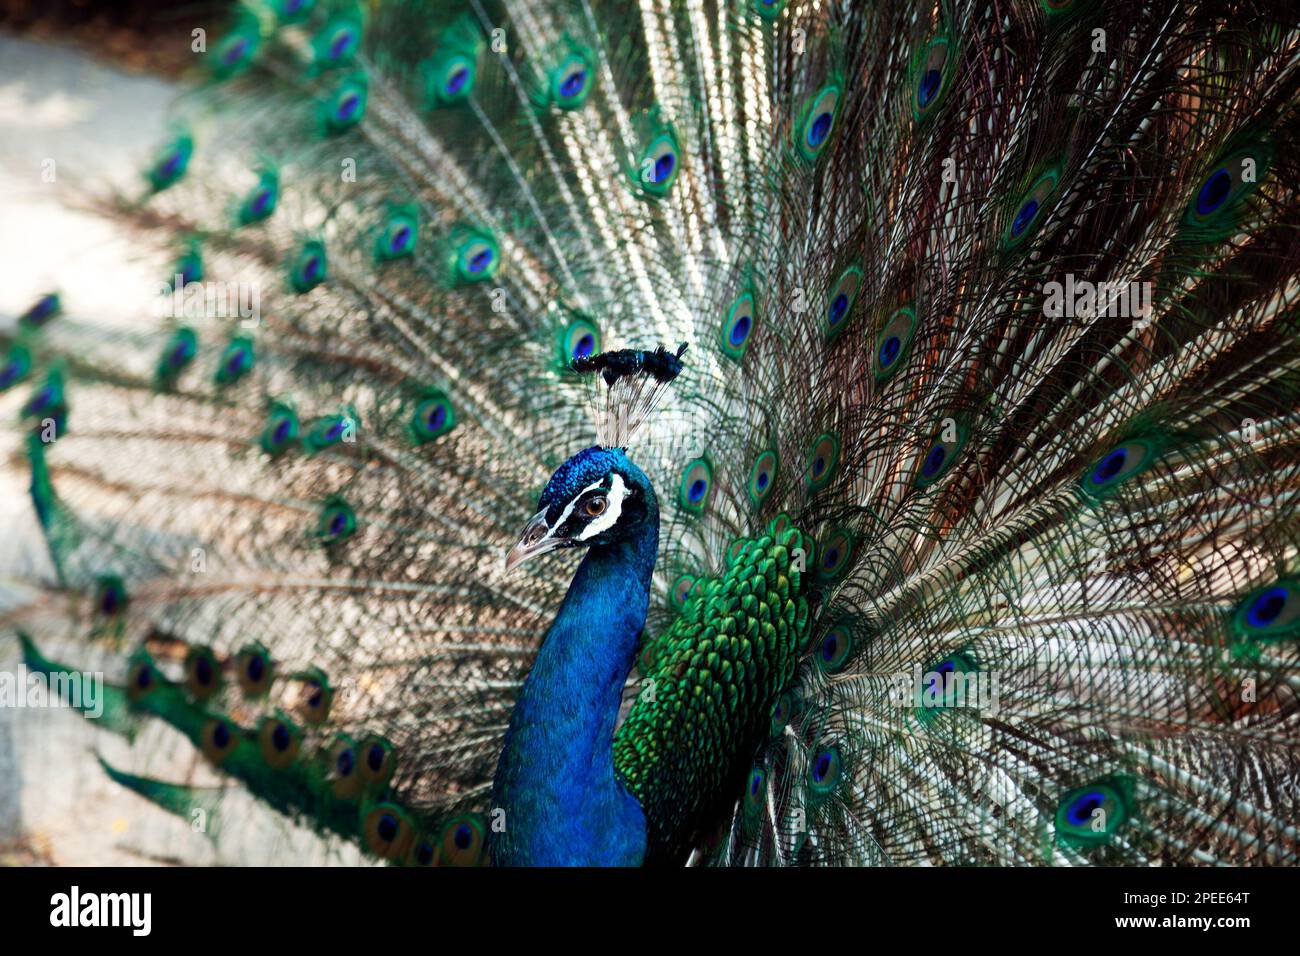 Elegant peacock displaying its tail as part of mating ritual. Blue and green male peafowl showing train feathers Stock Photo